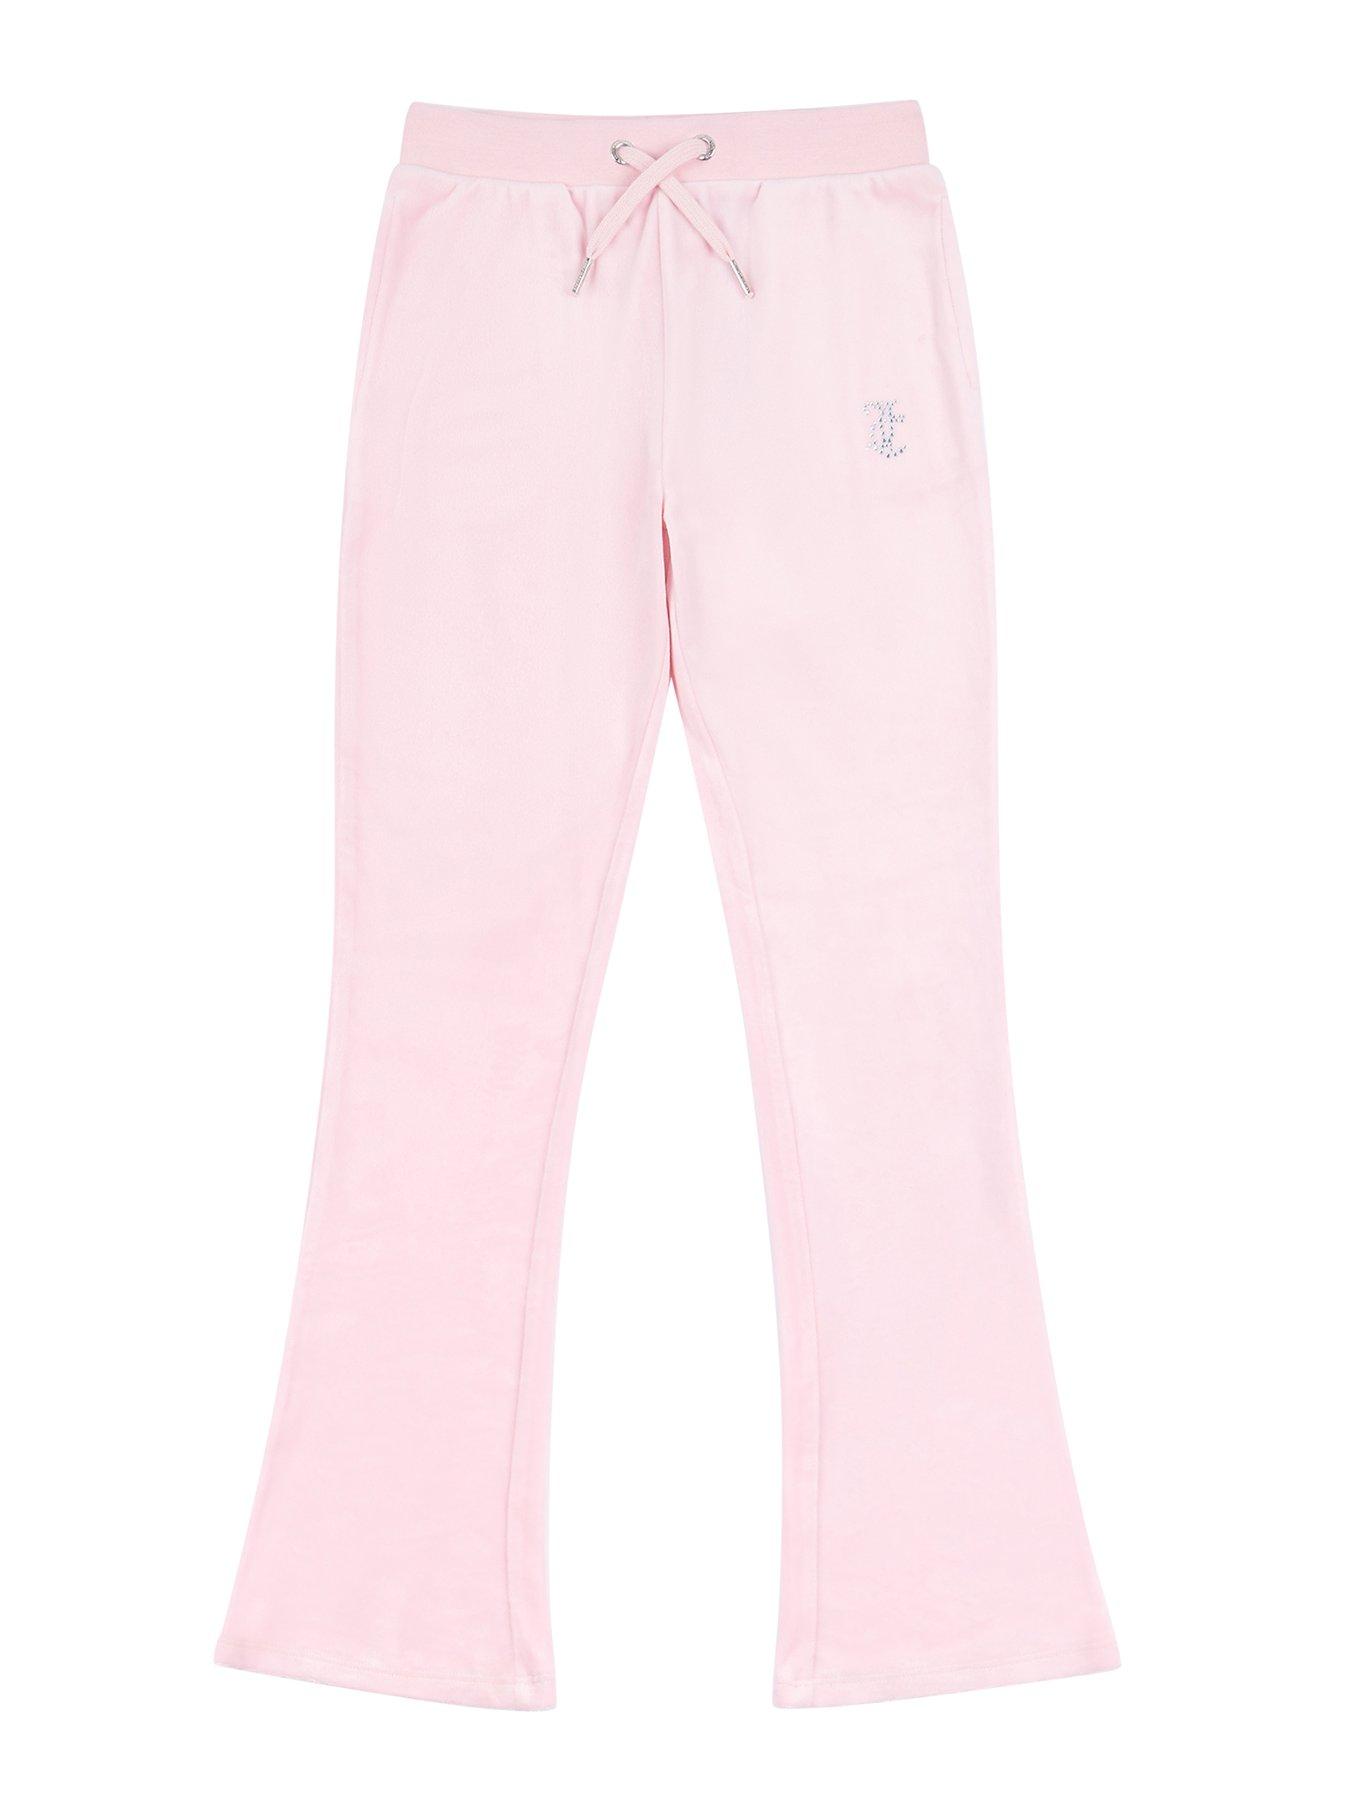 Sale, Juicy Couture Kids Velour Bootcut Sweatpants (7-16 Years)